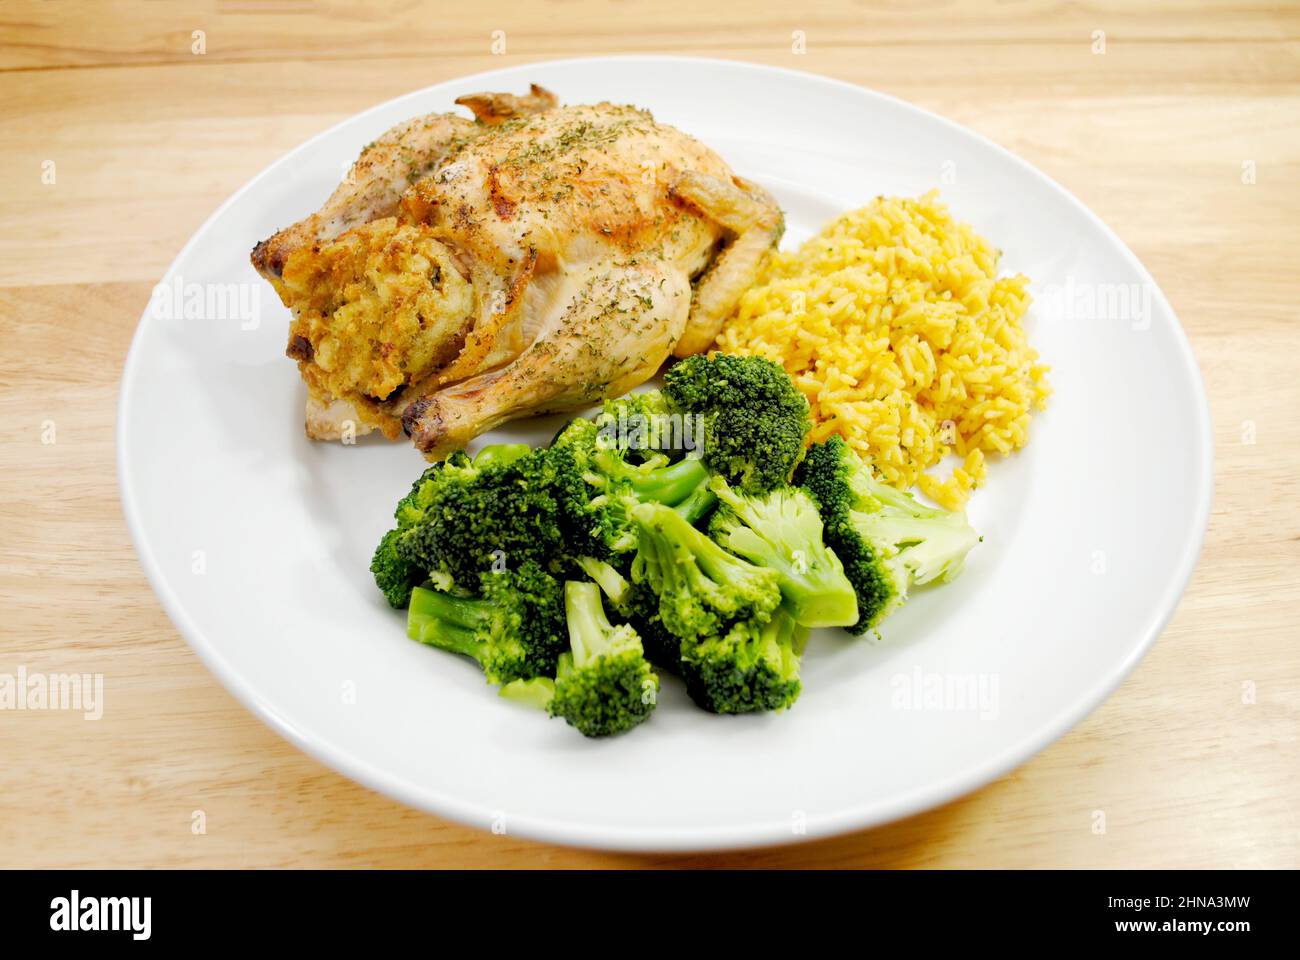 A Plated Healthy Dinner of Cornish Game Hen, Reice and Steamed Broccoli Stock Photo